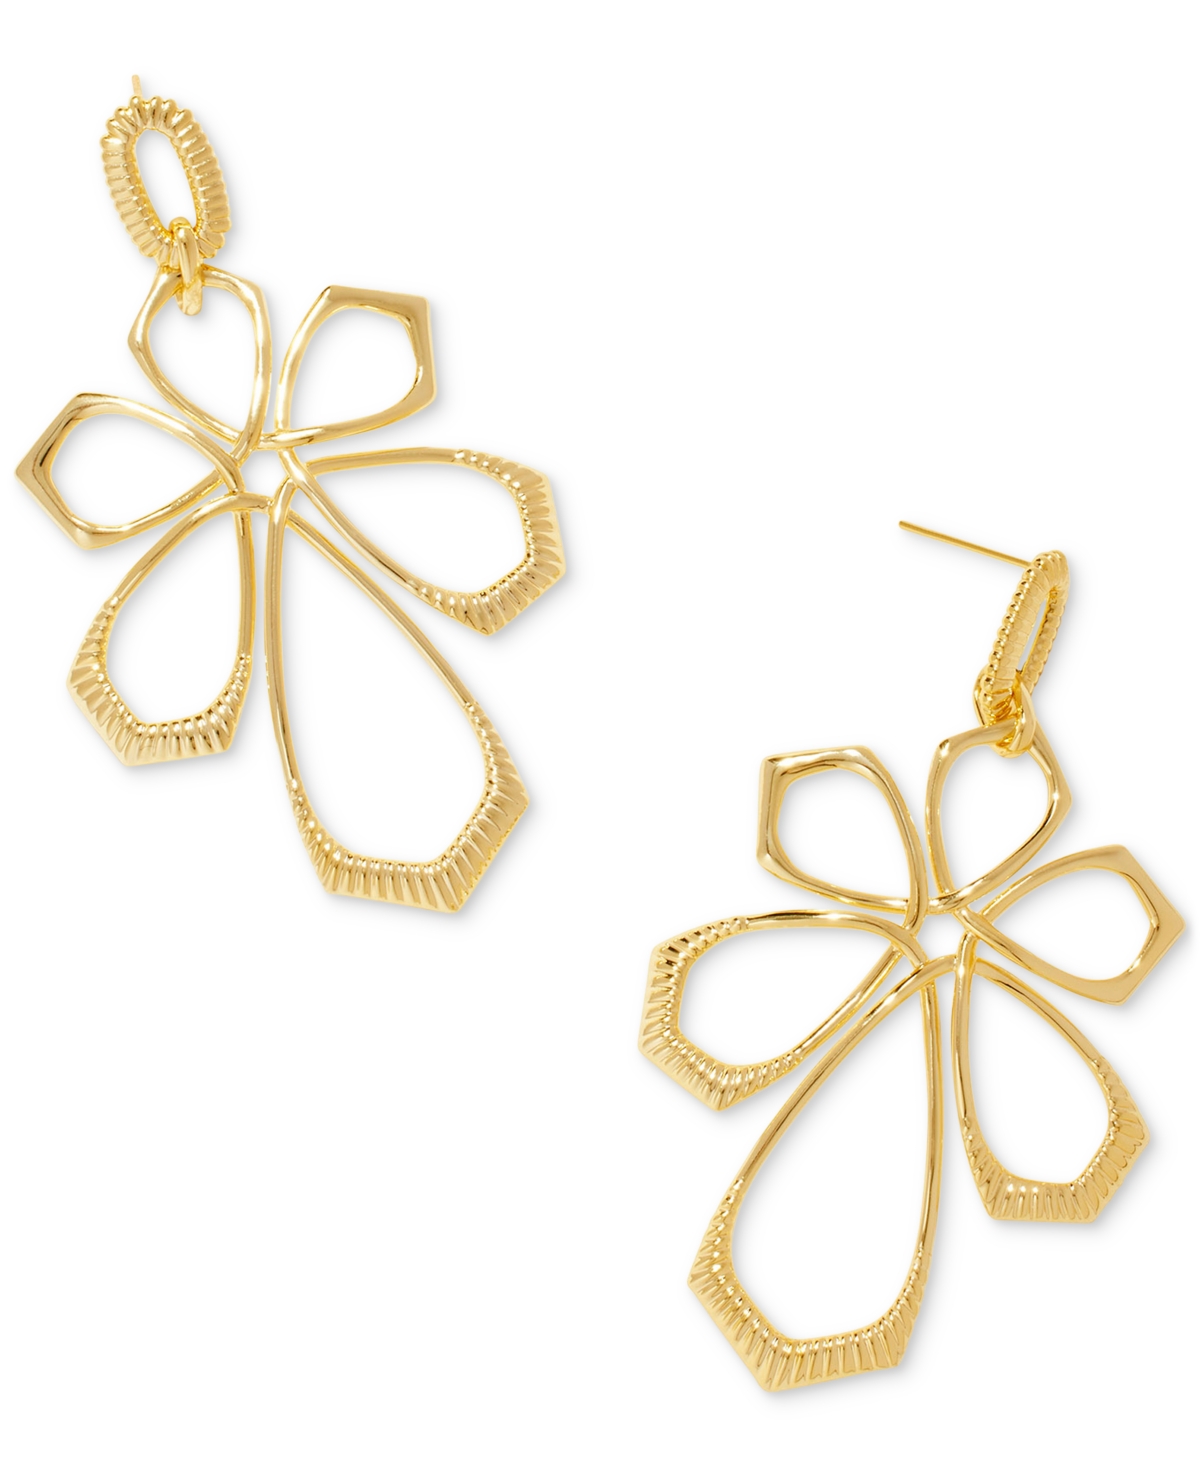 14k Gold-Plated Smooth & Textured Flower Statement Earrings - Gold Golde